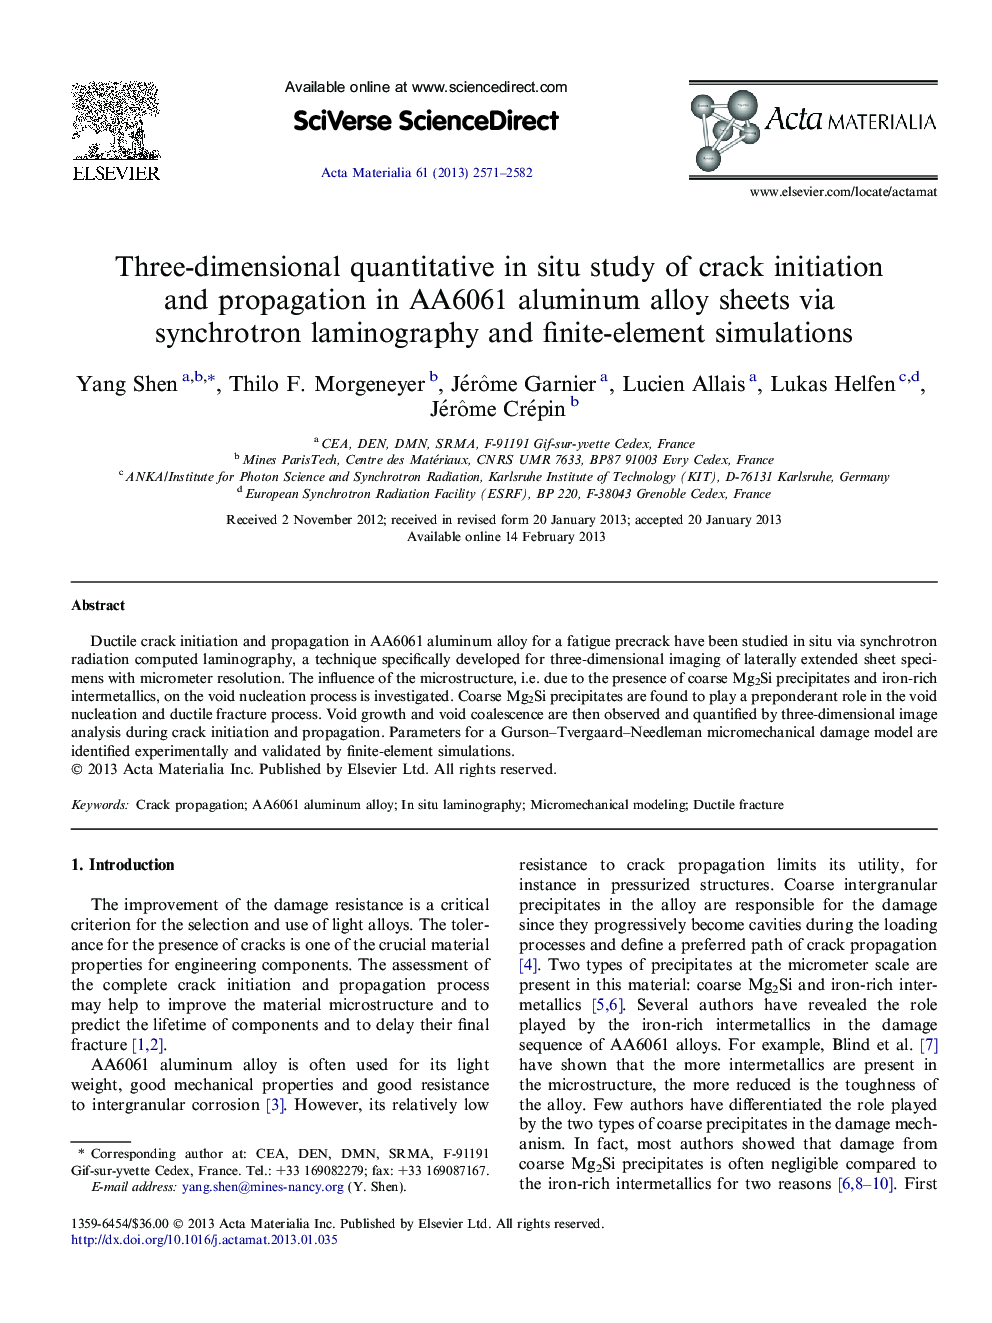 Three-dimensional quantitative in situ study of crack initiation and propagation in AA6061 aluminum alloy sheets via synchrotron laminography and finite-element simulations